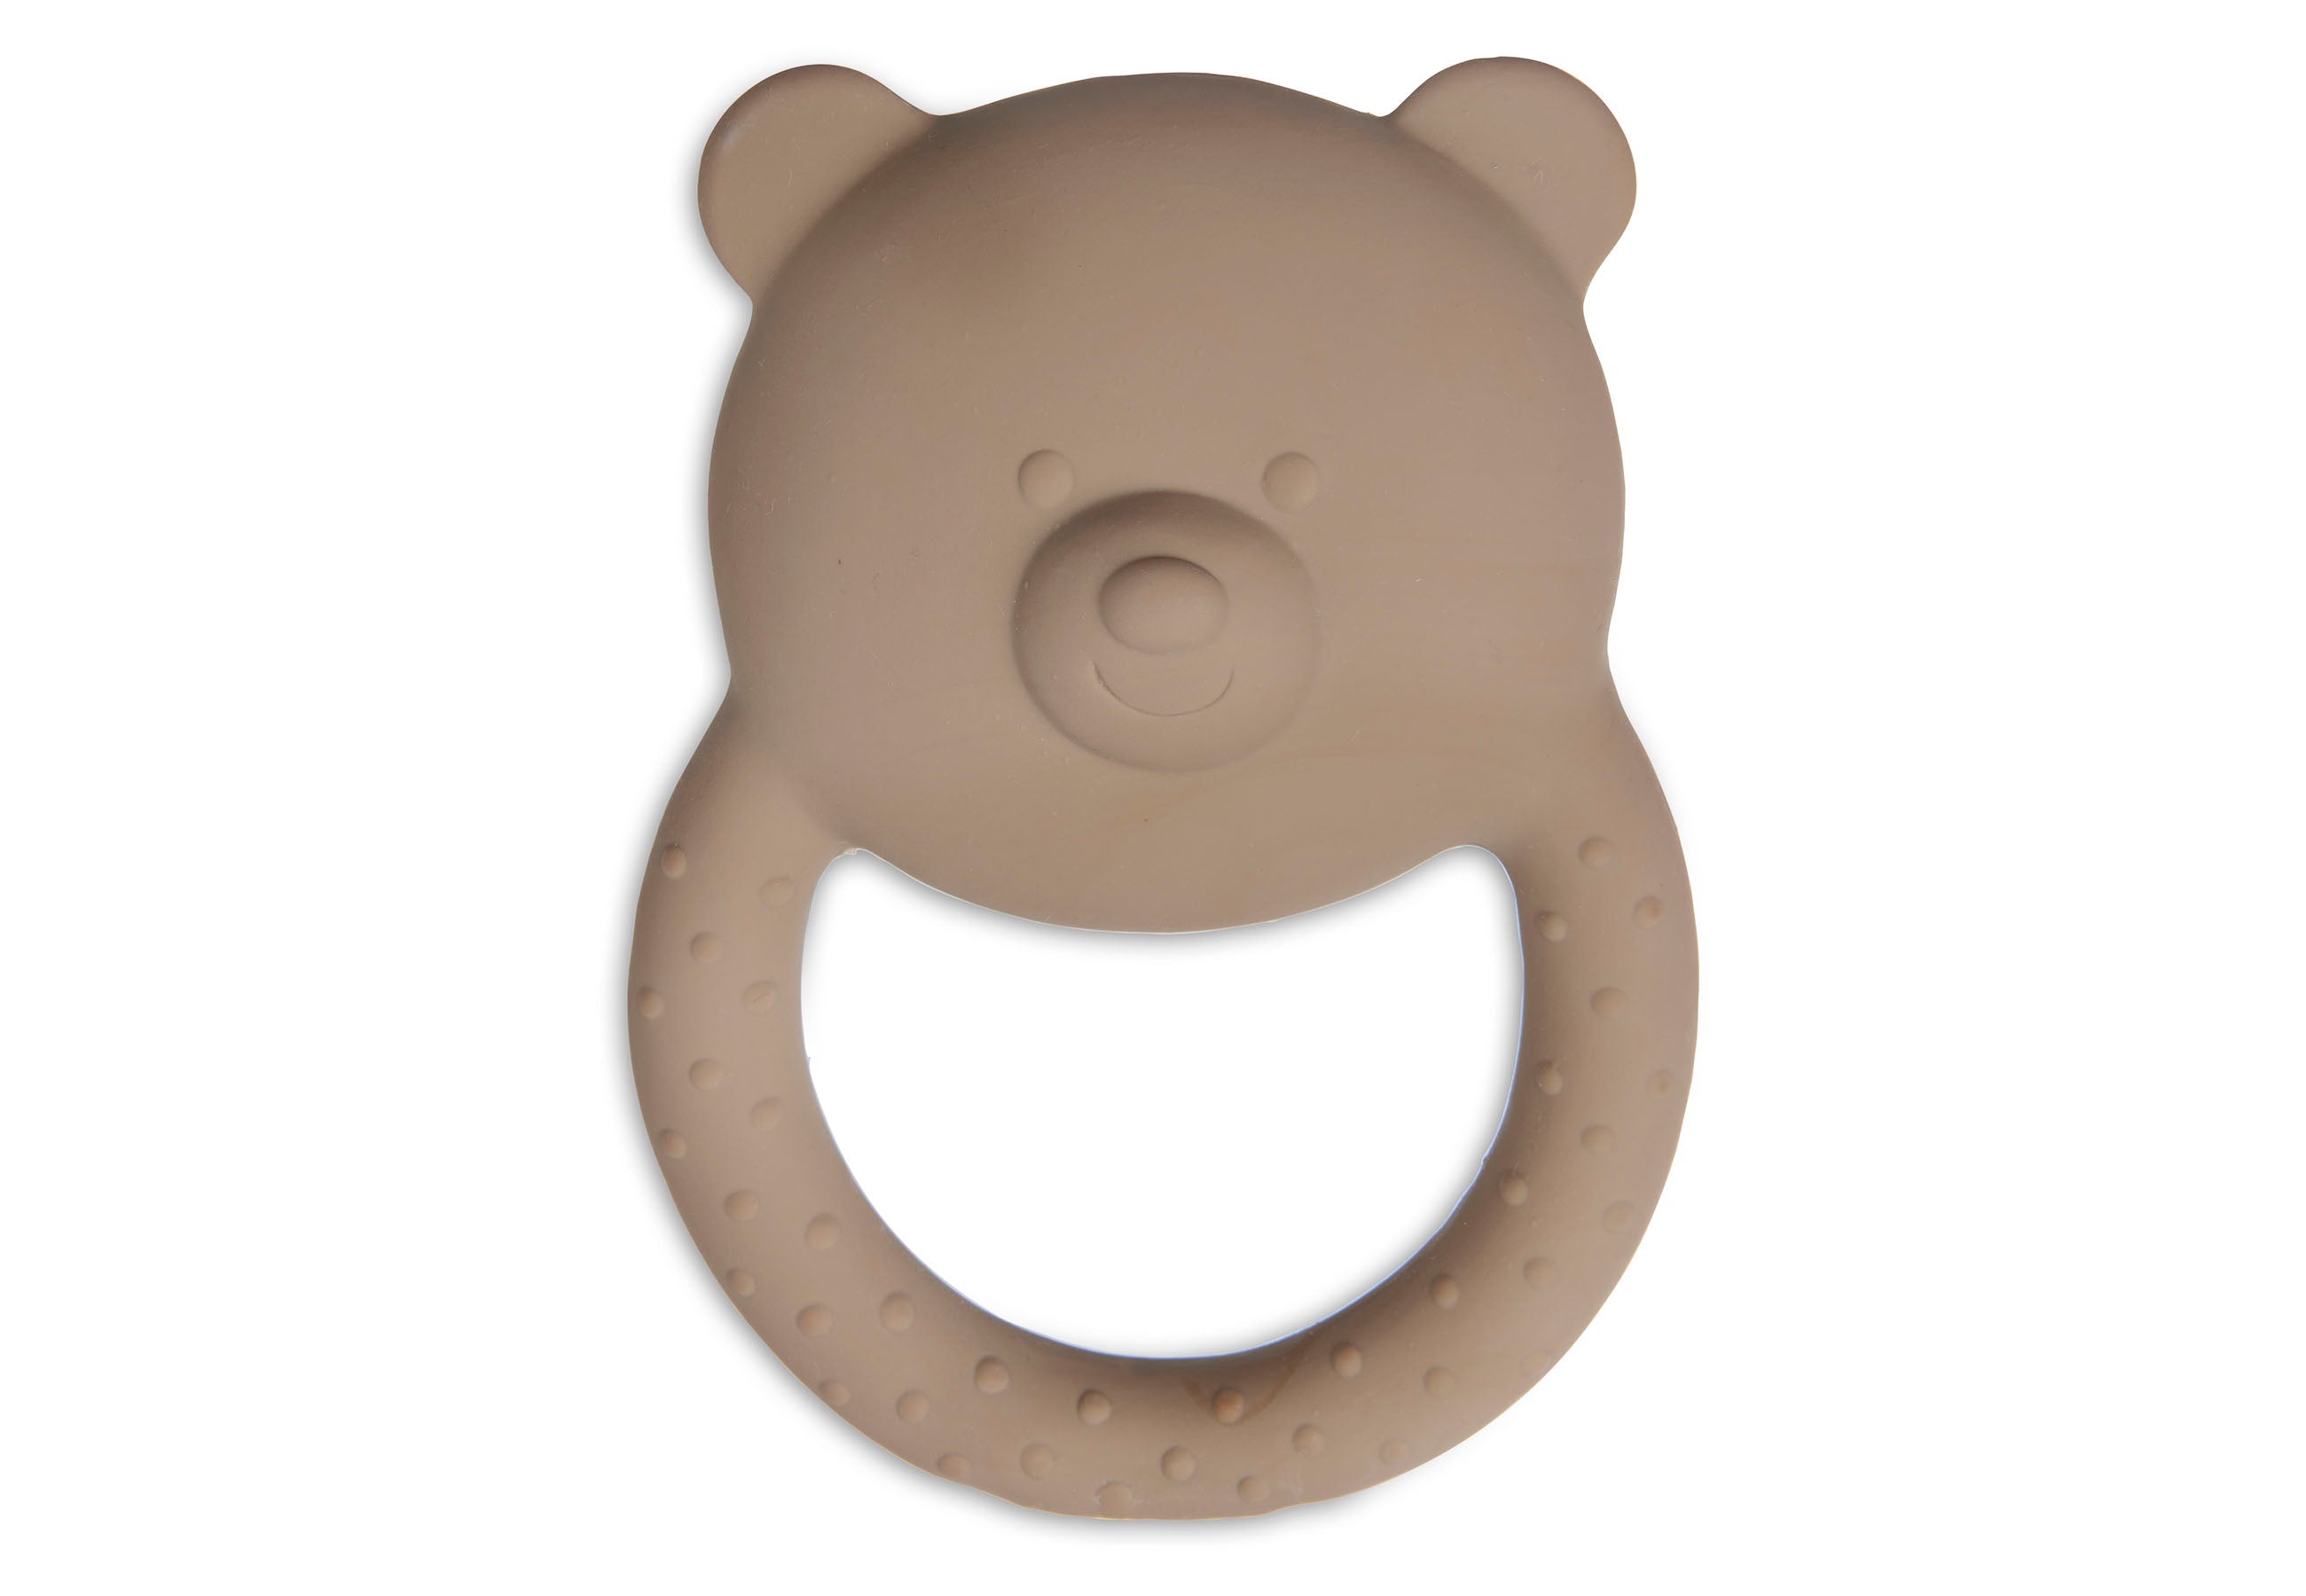 JoGenii, Silicon teether ring fish